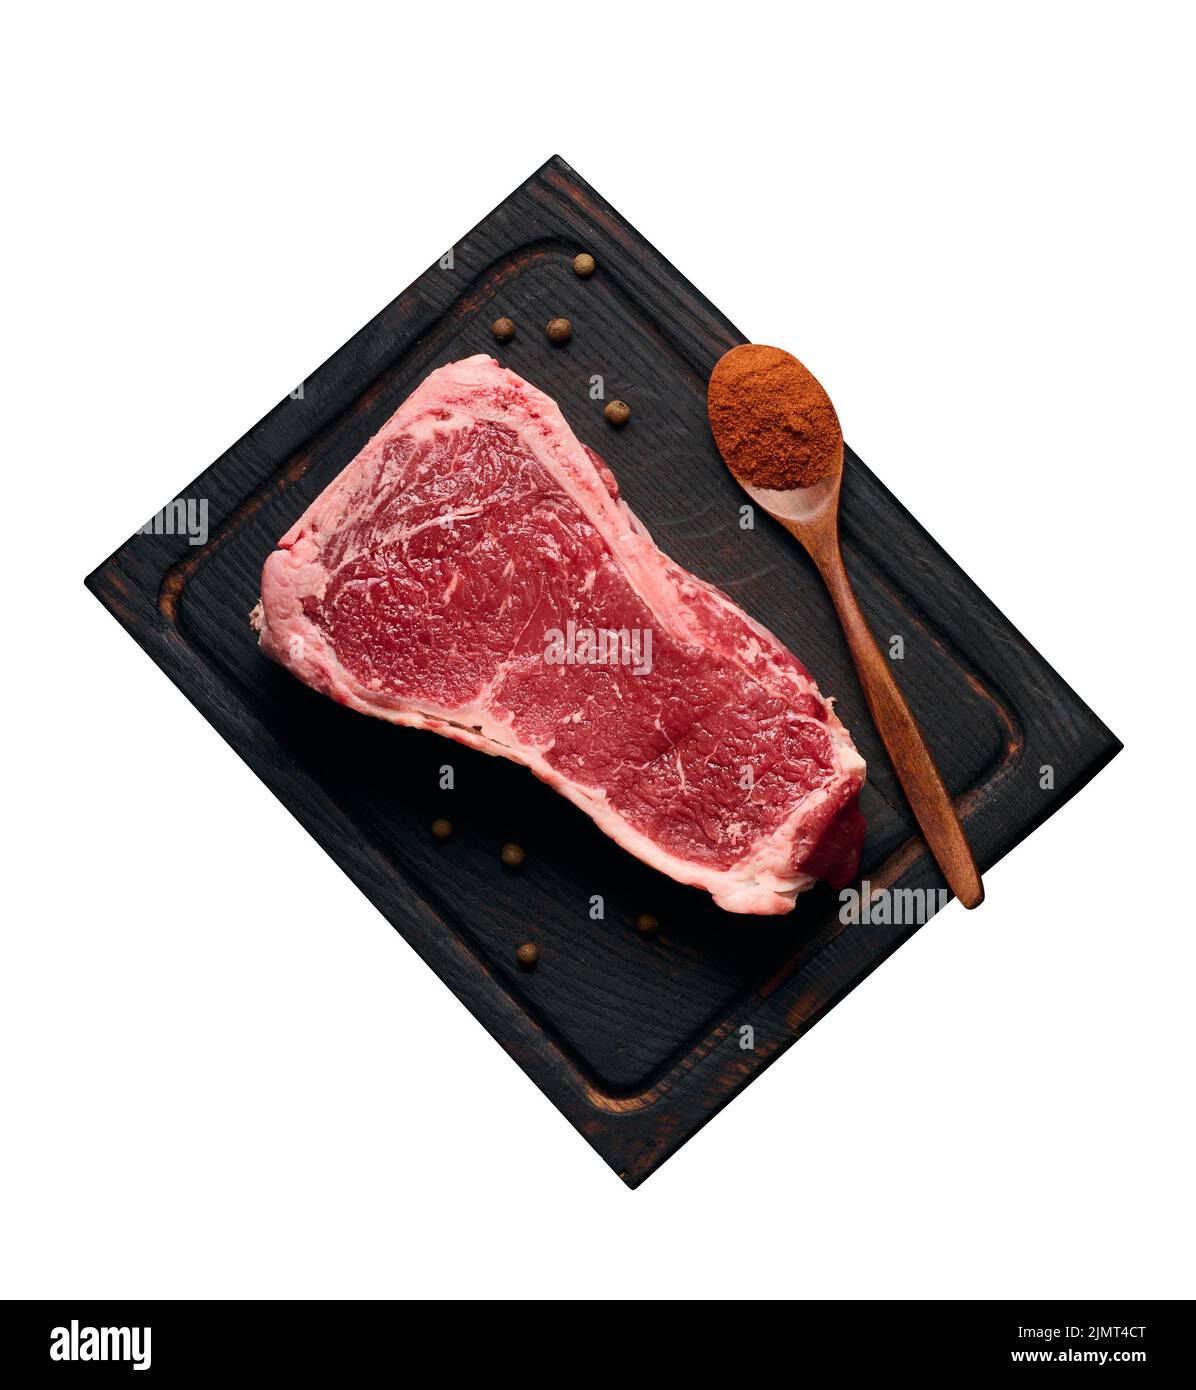 Raw juicy piece of beef meat on the bone lies on a wooden cutting board, spices for cooking on a black background. Meat tenderlo Stock Photo